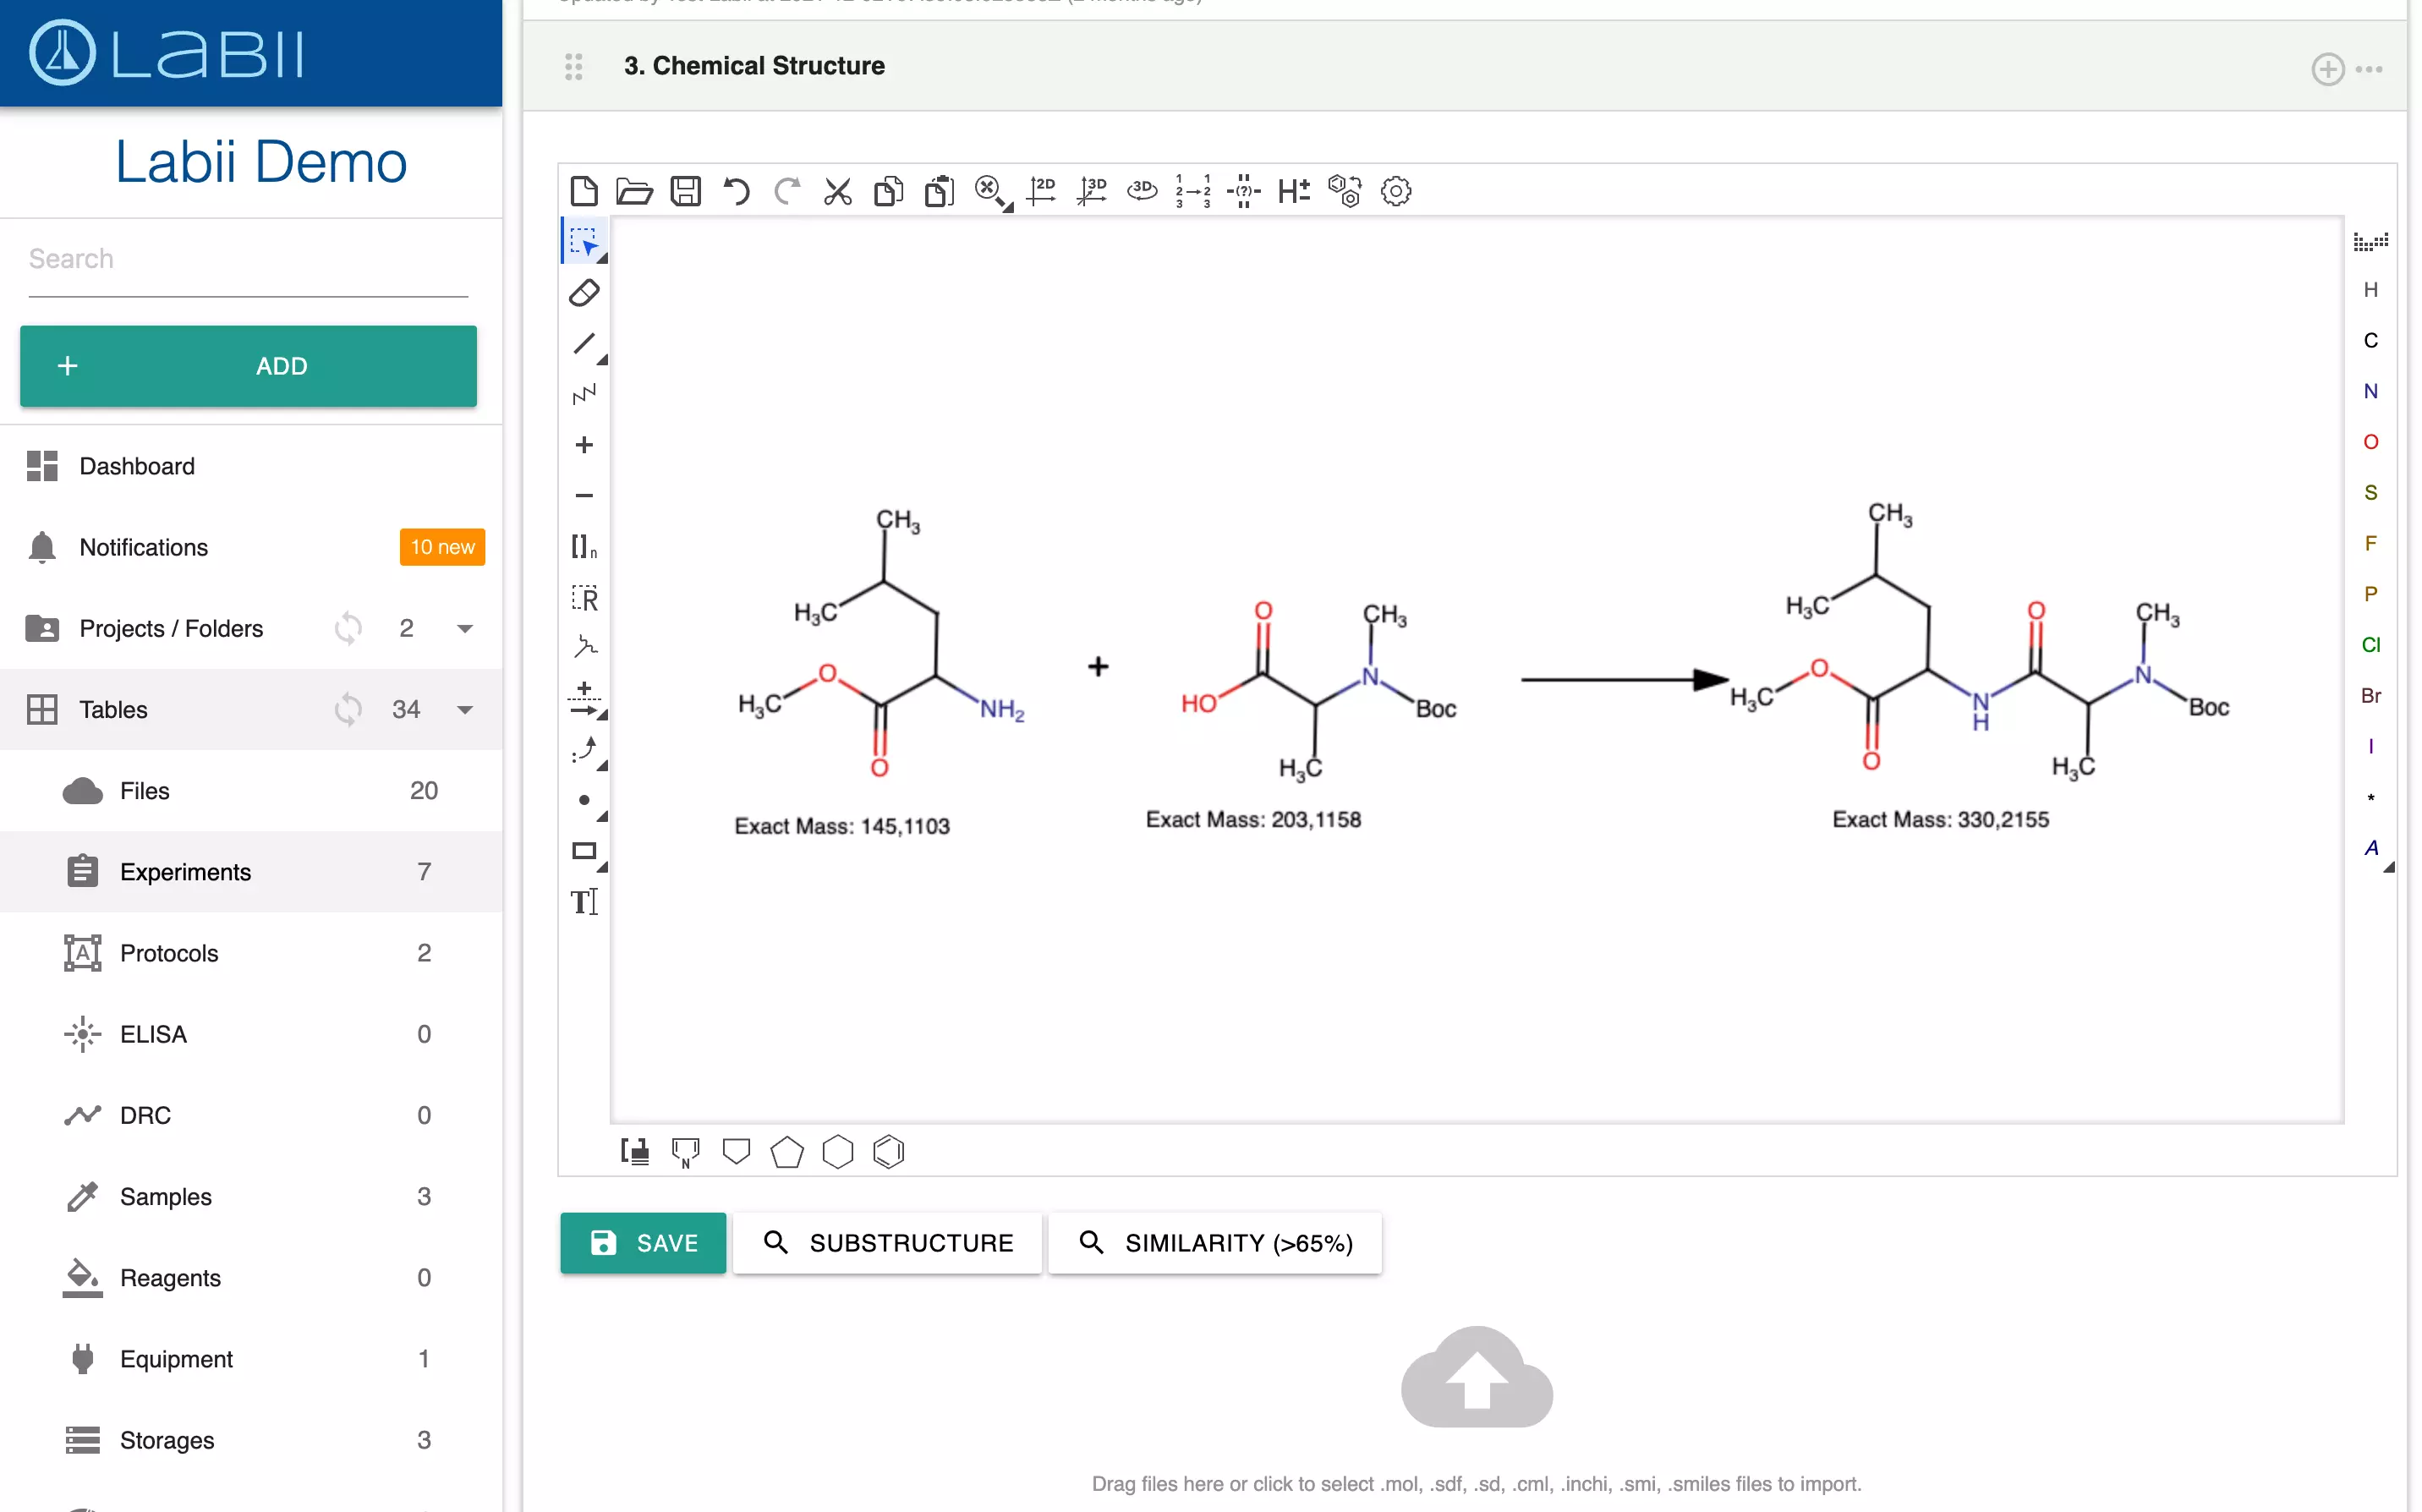 Chemical structure editor